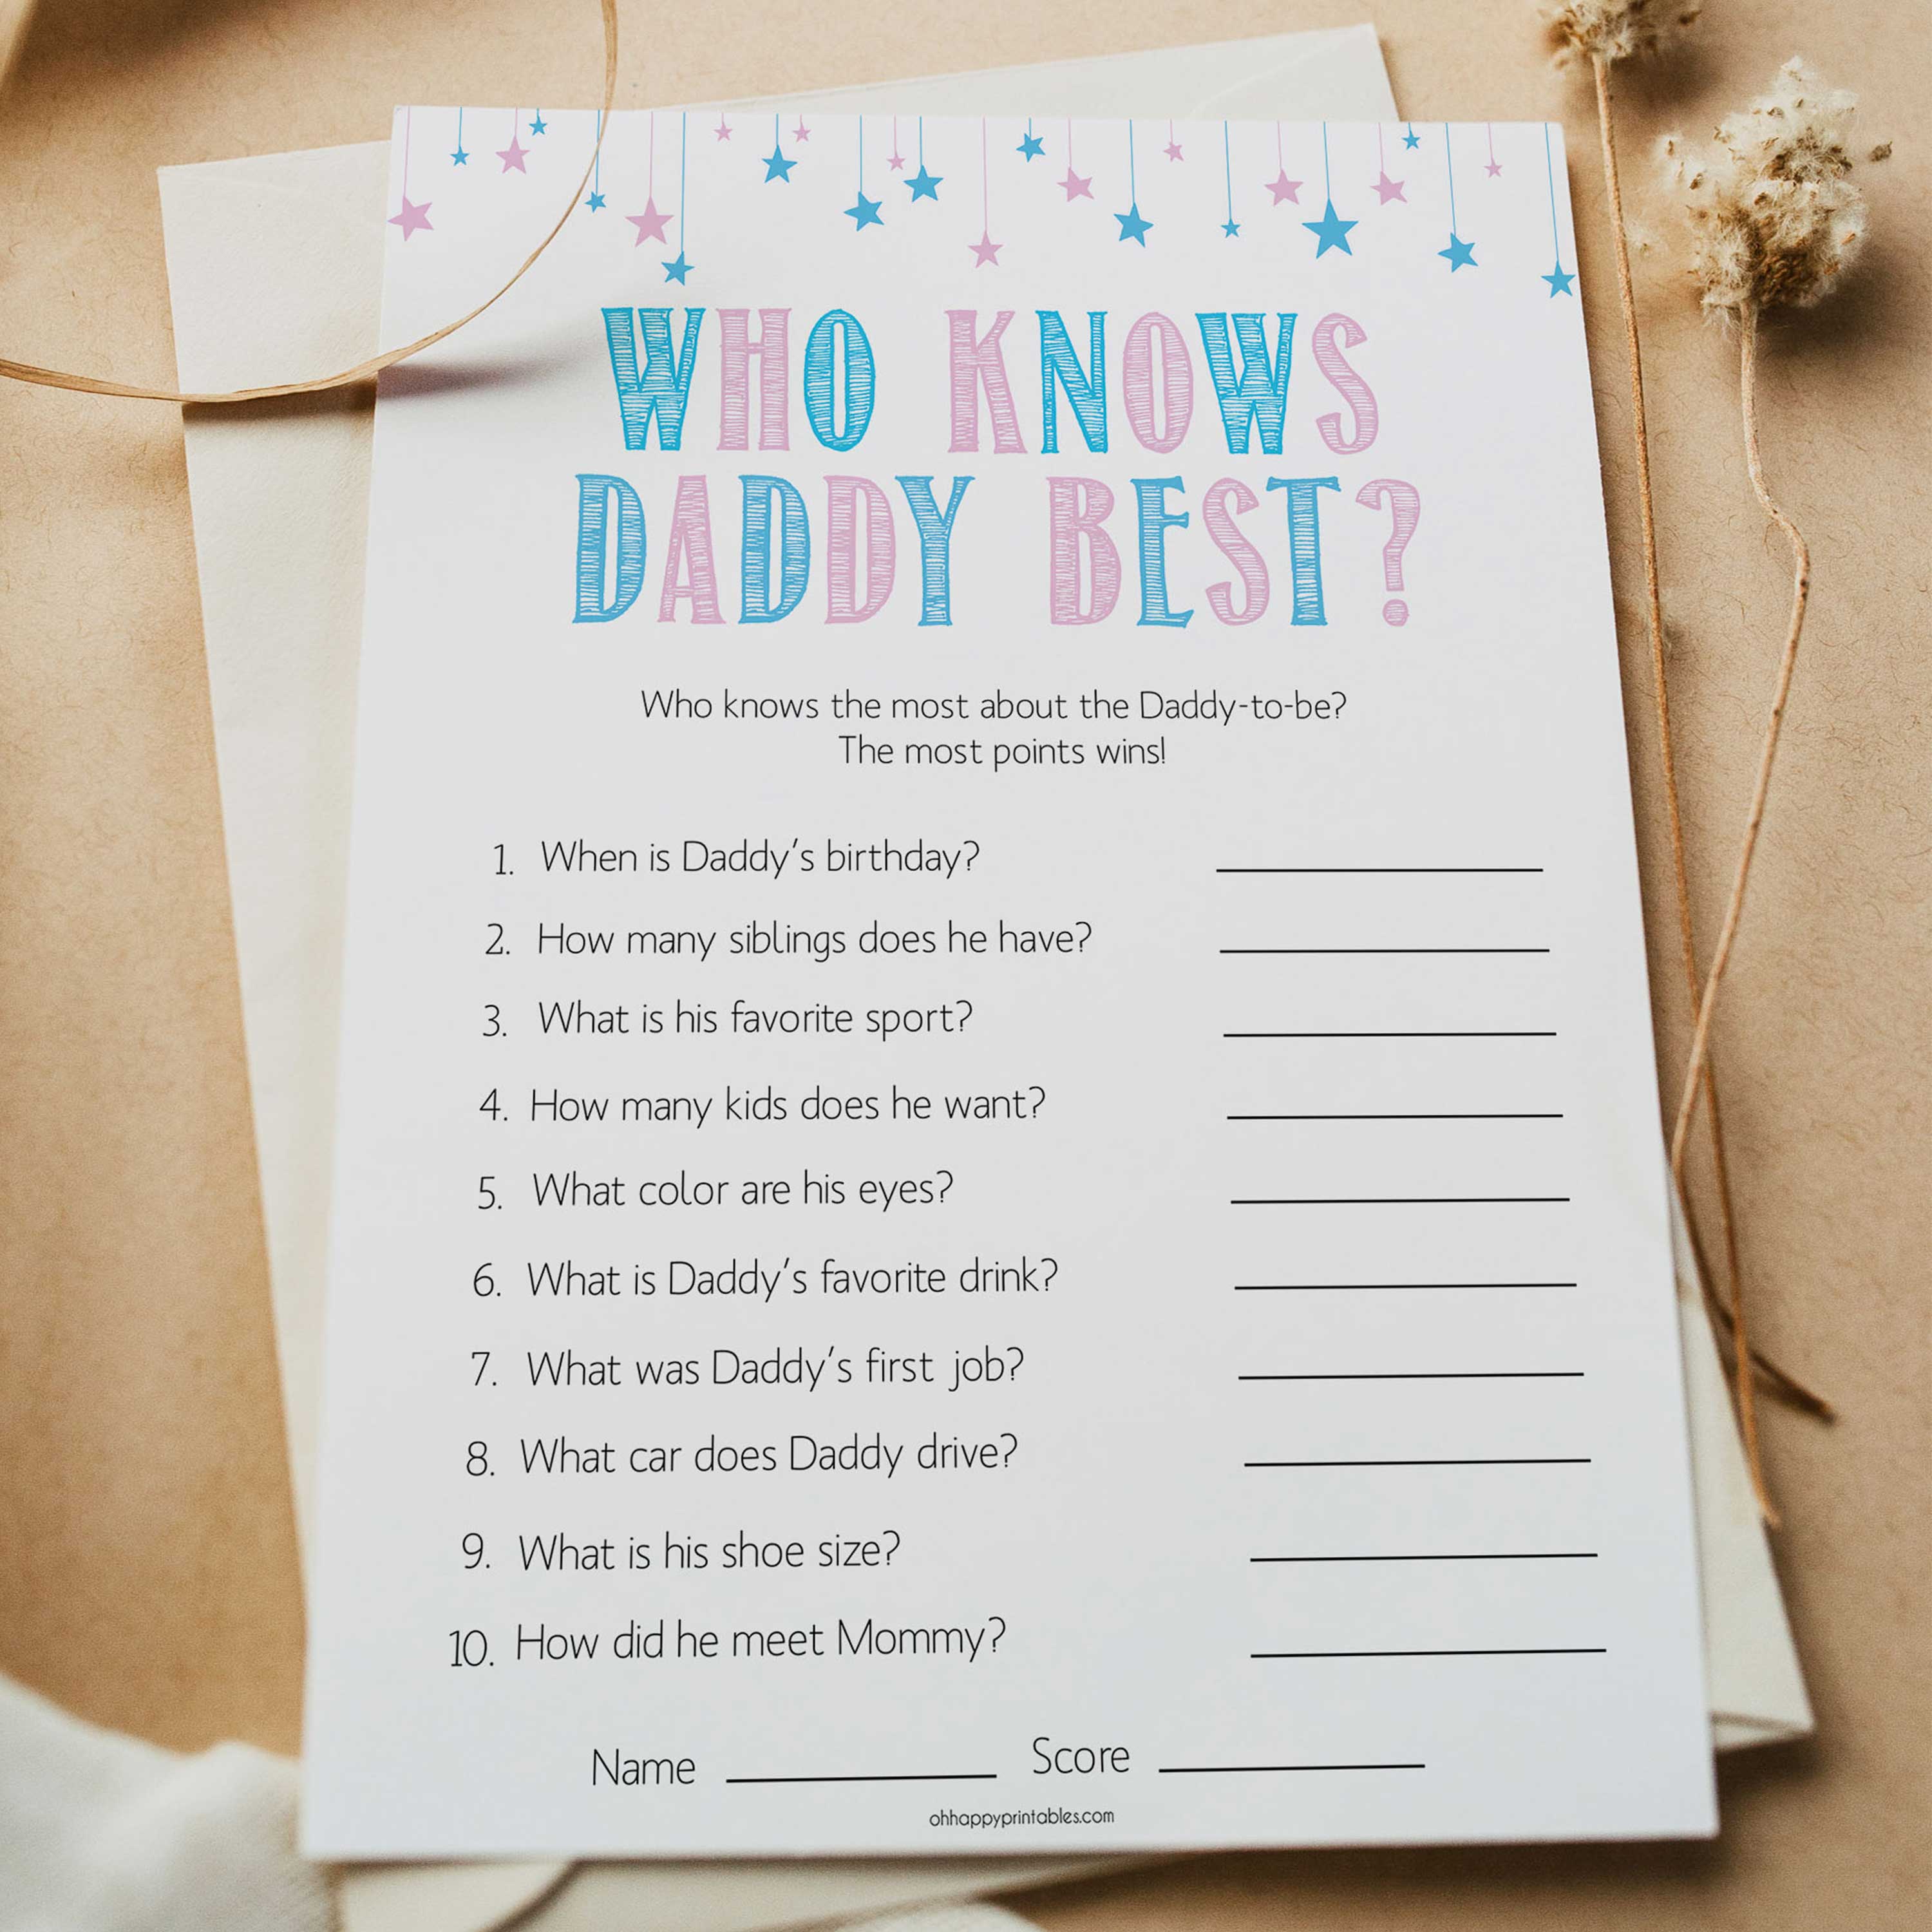 printable mommy and daddy